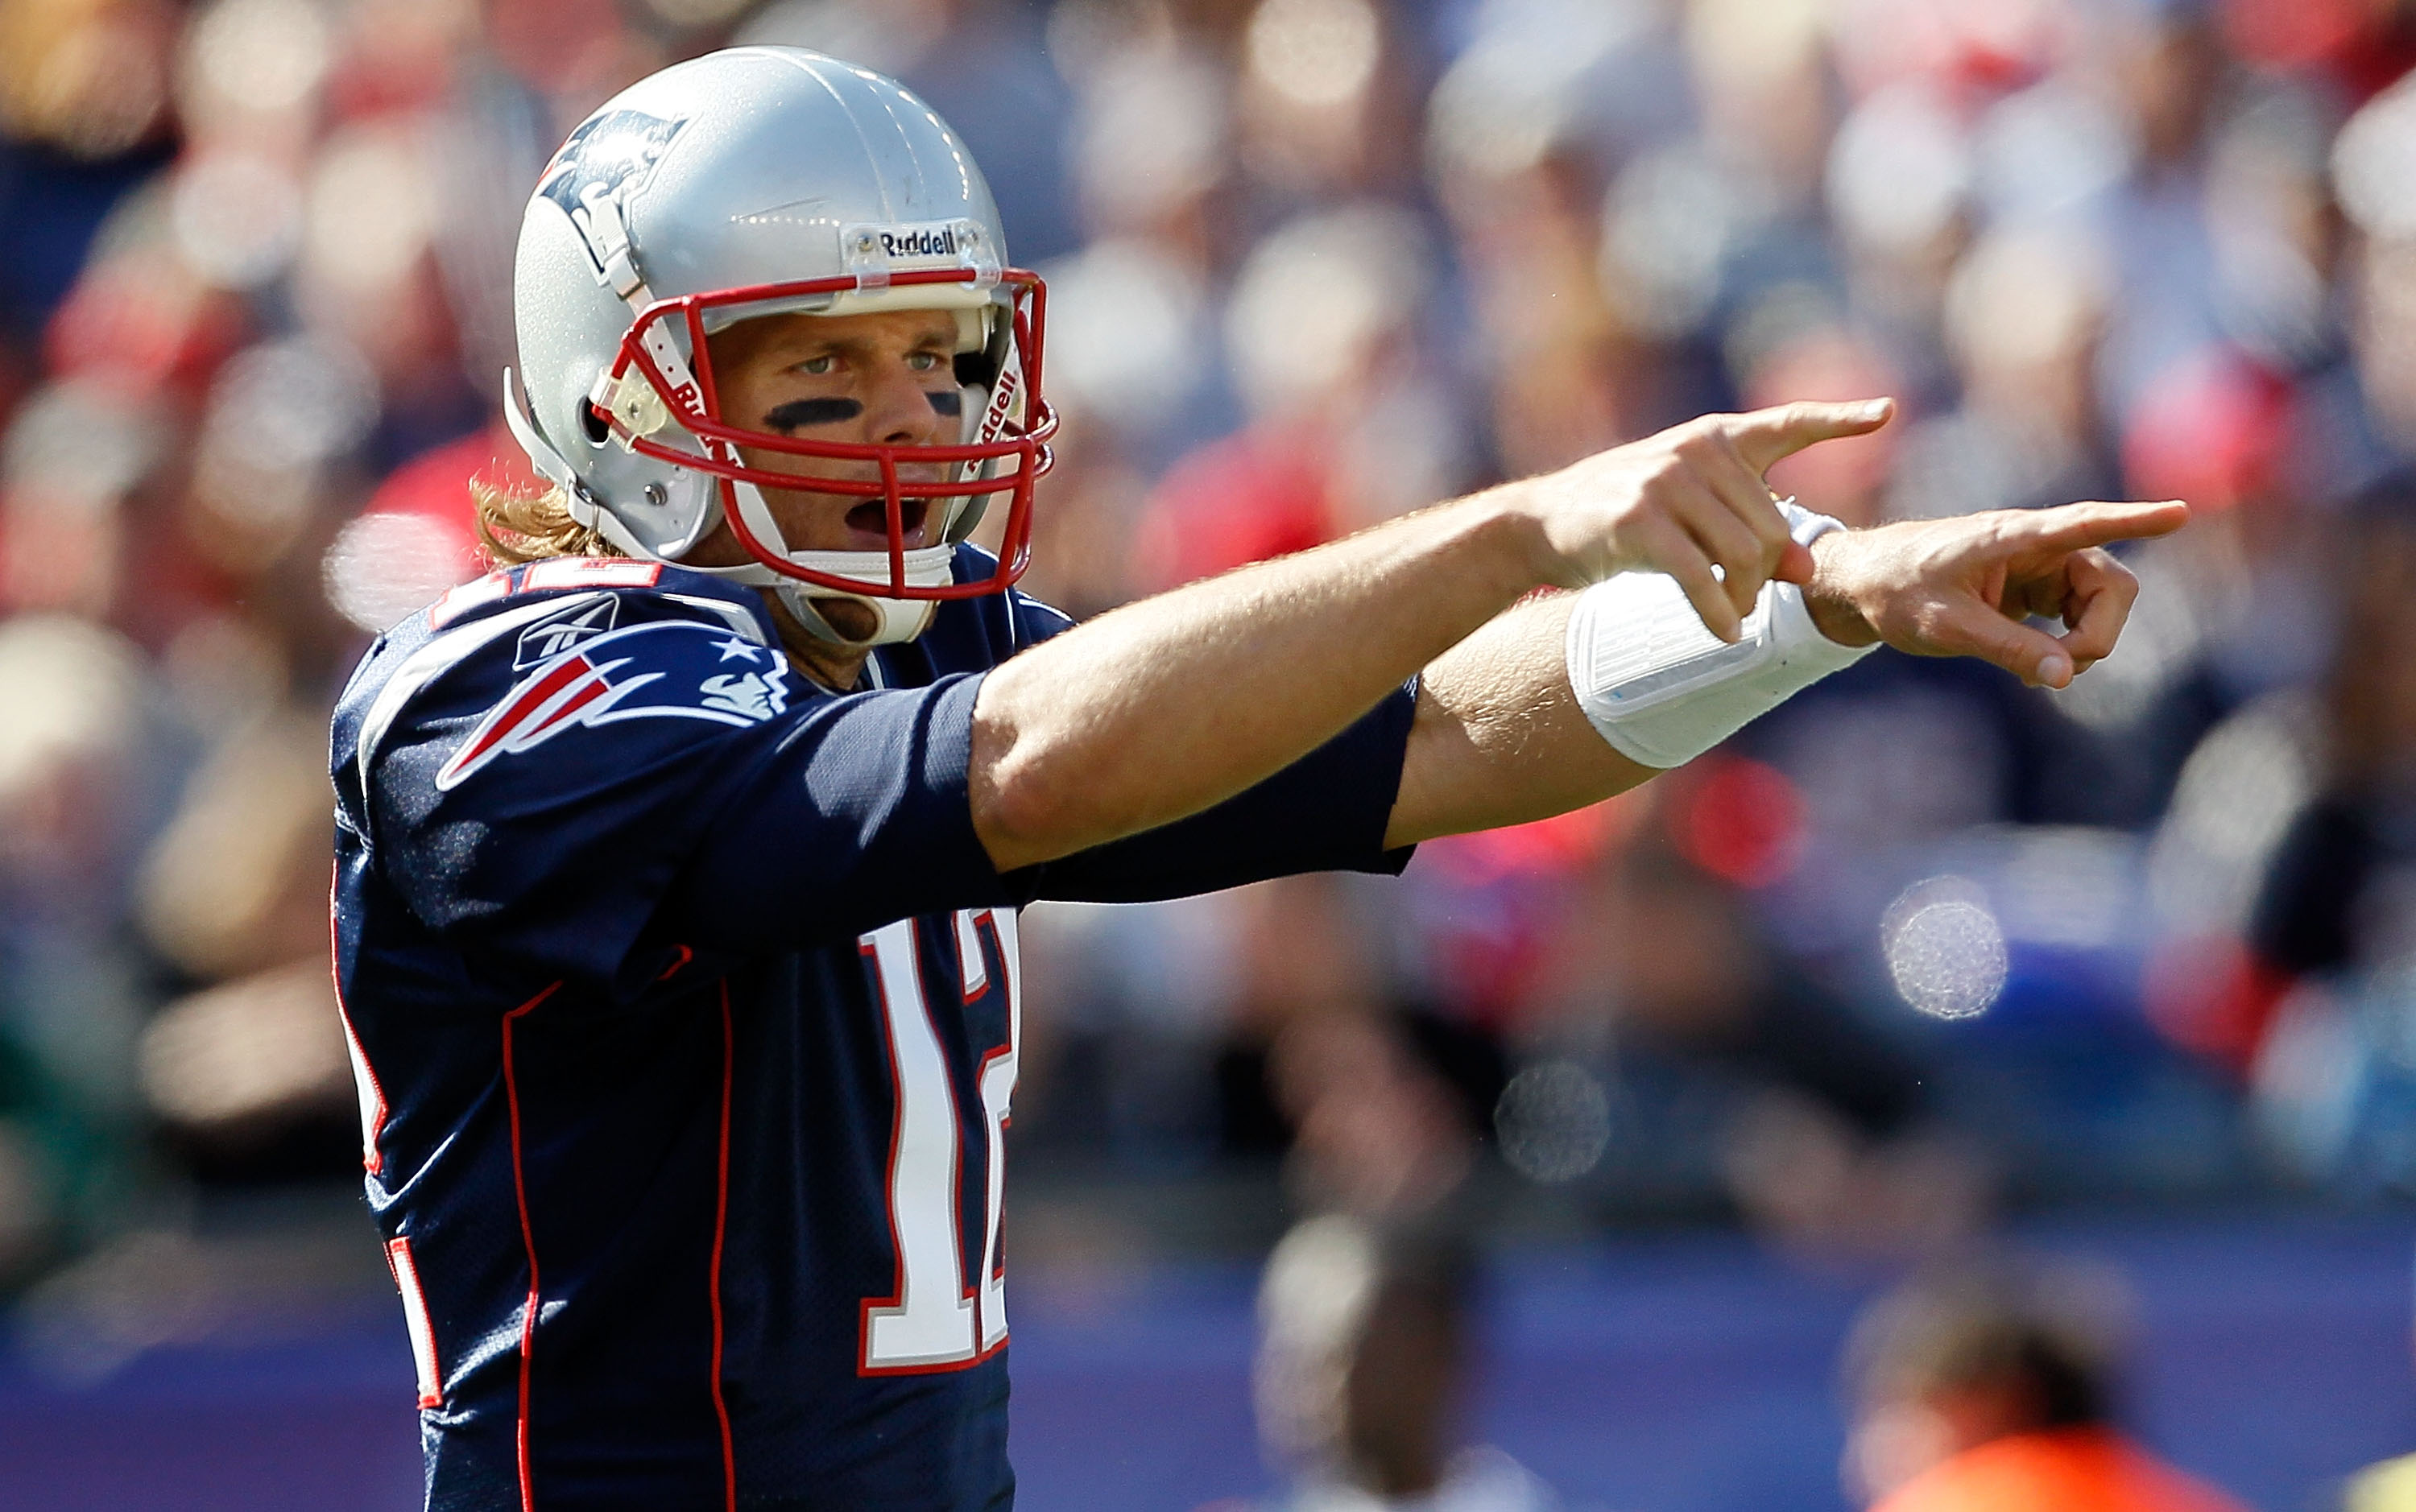 FOXBORO, MA - OCTOBER 17:  Tom Brady #12 of the New England Patriots gestures during a game against the Baltimore Ravens at Gillette Stadium on October 17, 2010 in Foxboro, Massachusetts. (Photo by Jim Rogash/Getty Images)